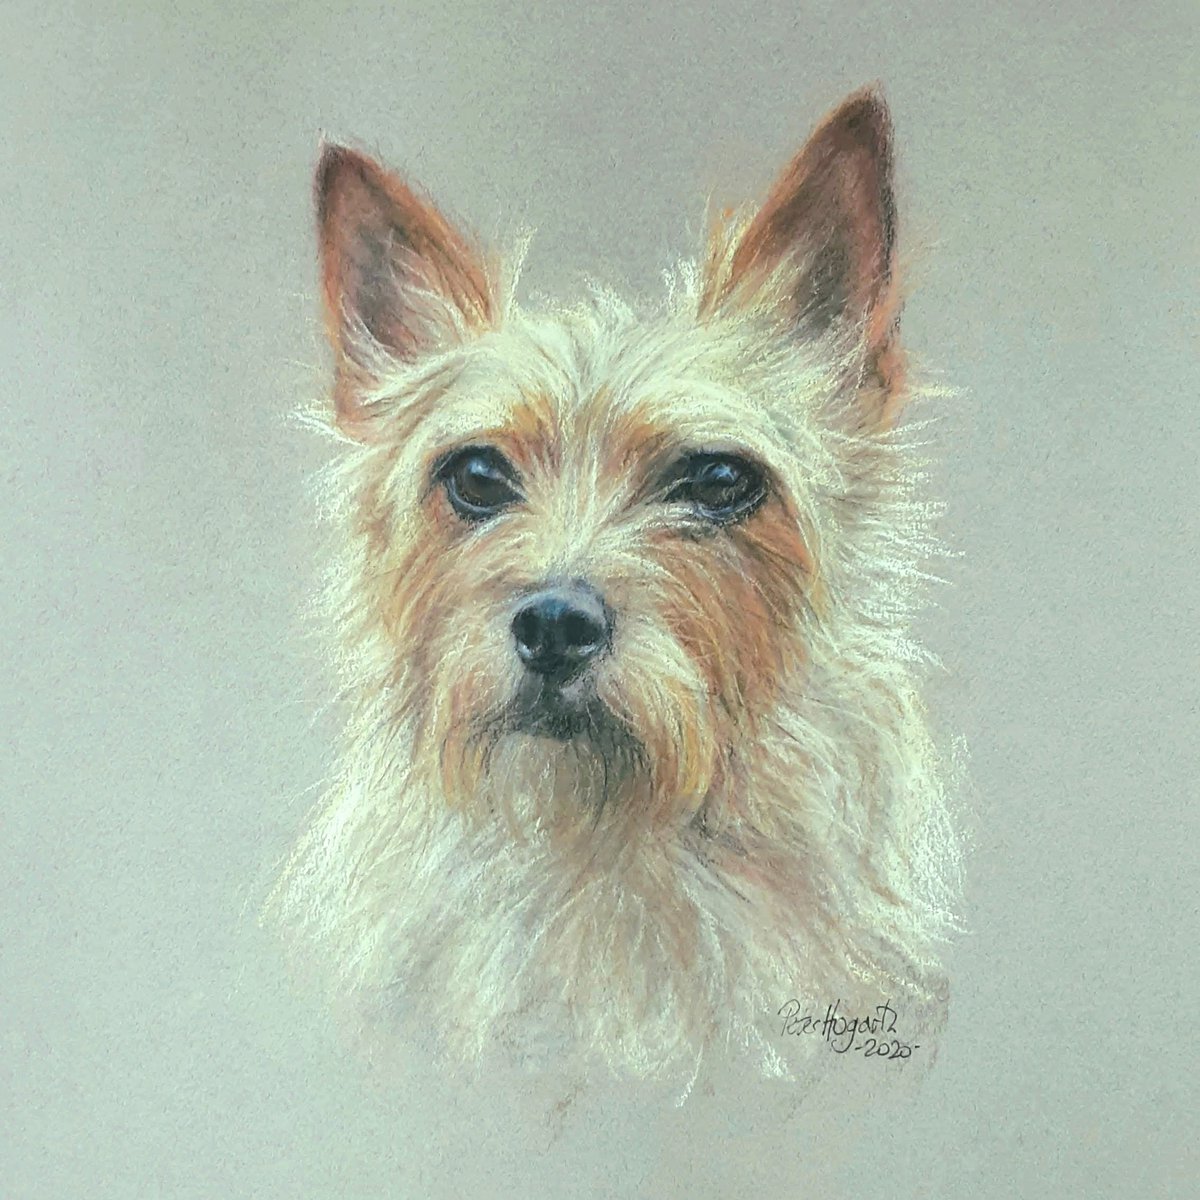 A scruffy terrier to greet you today.  I painted this delightful little chap in 2020. -soft pastels on Canson Mi Teintes paper 😊